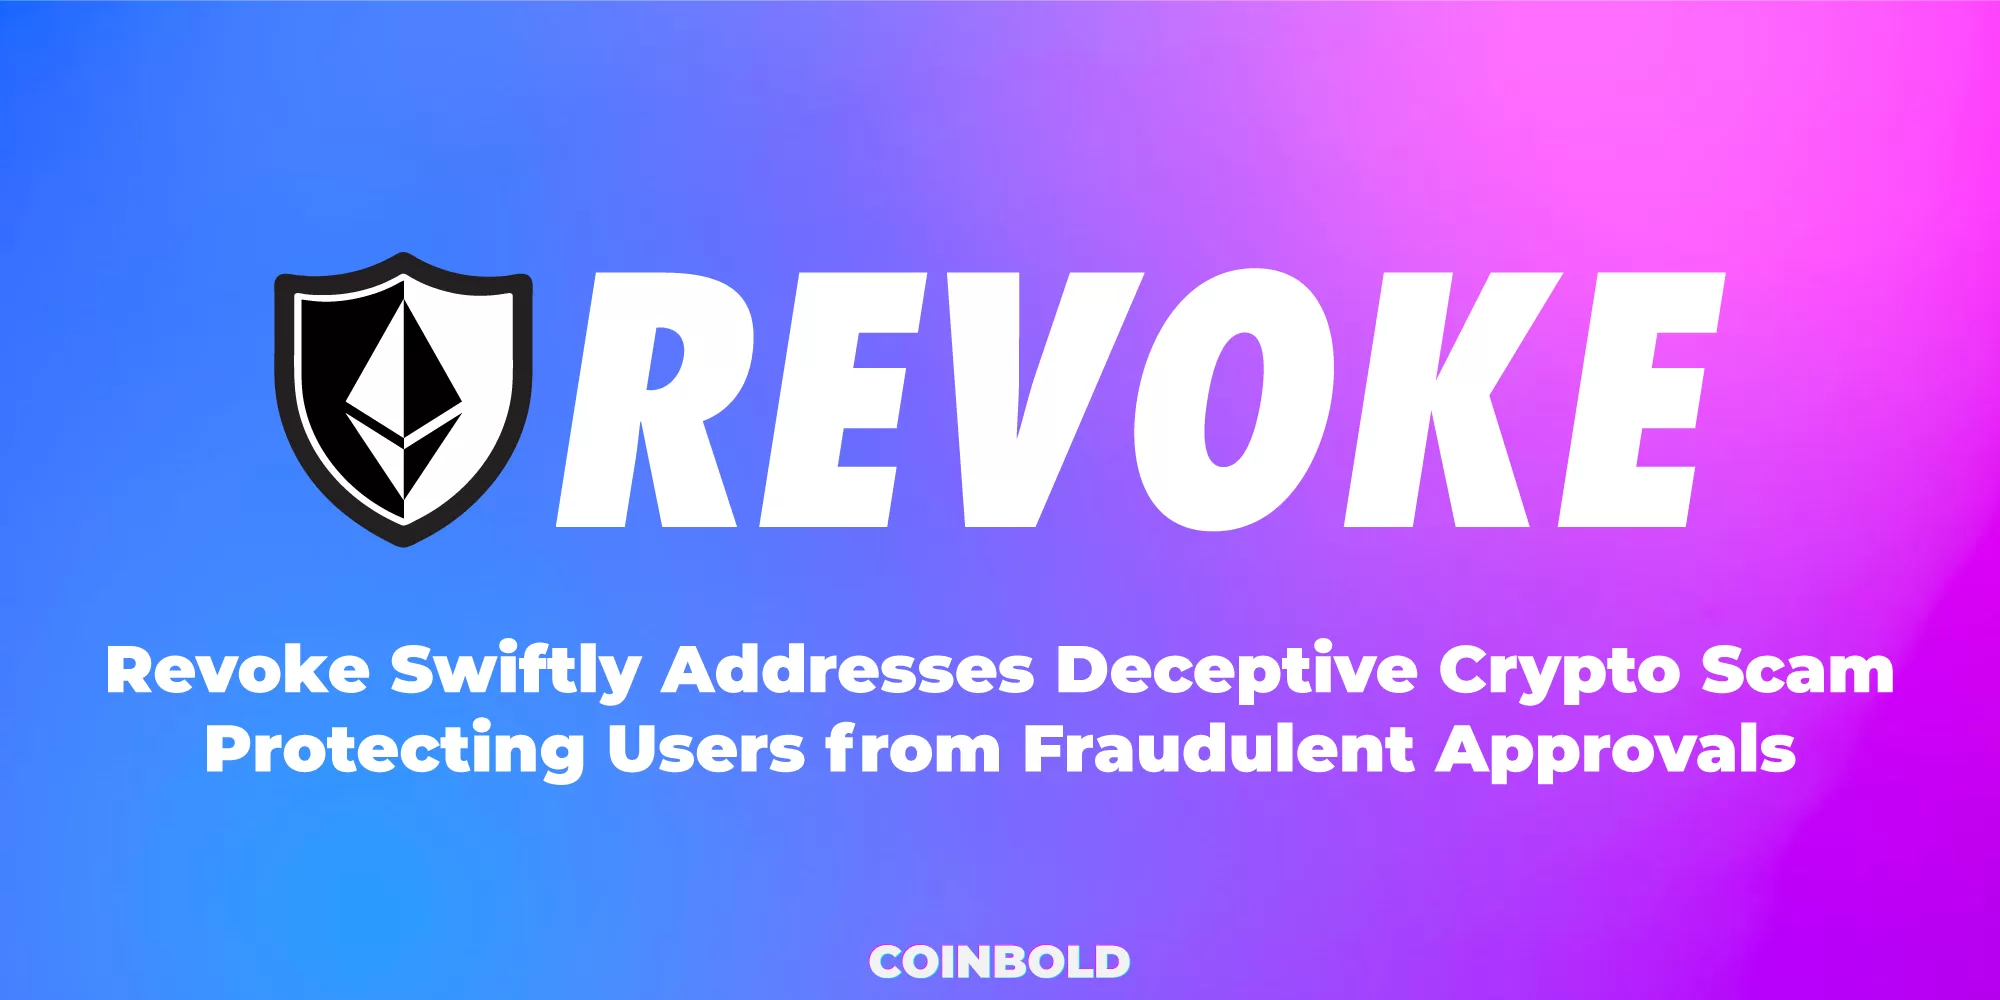 Revoke Swiftly Addresses Deceptive Crypto Scam: Protecting Users from Fraudulent Approvals